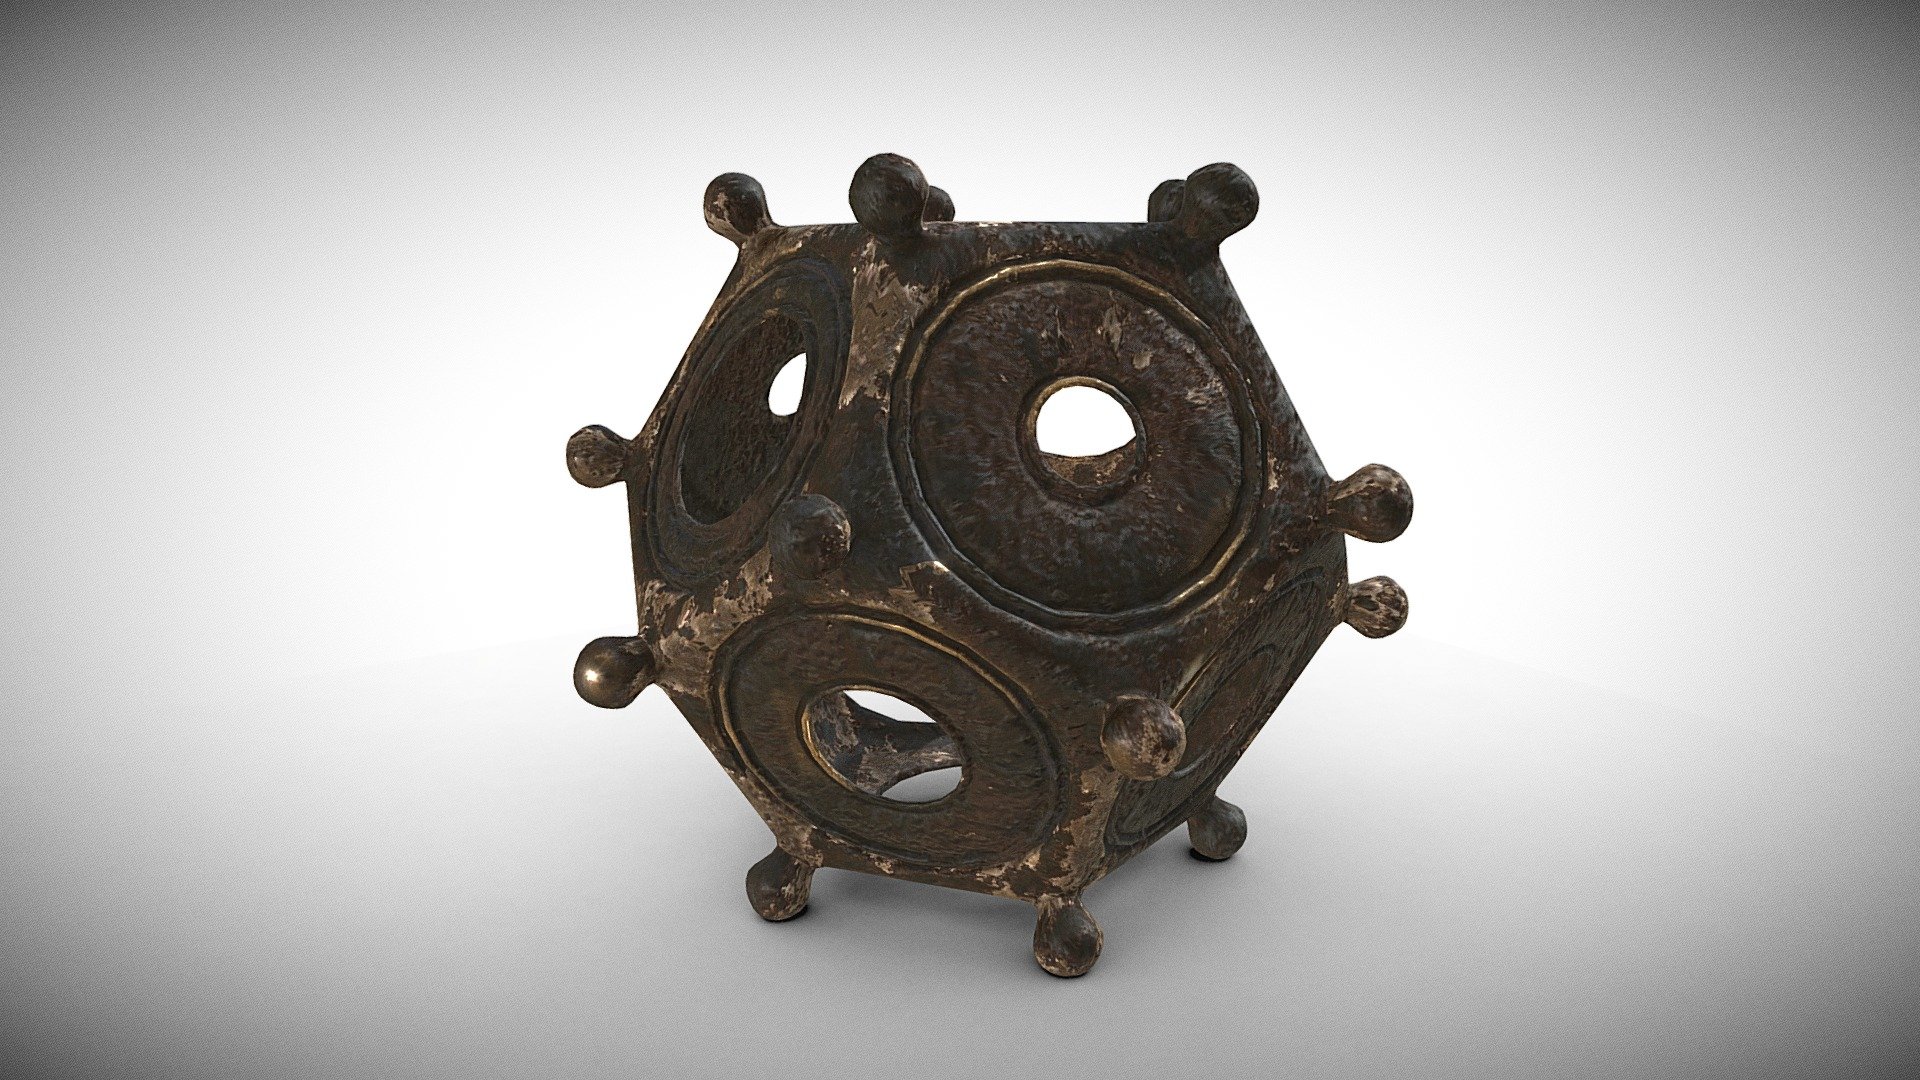 Modeled in Blender and textured in Substance Painter. Original concept and more background for the object can be found here: https://en.wikipedia.org/wiki/Roman_dodecahedron - Roman dodecahedron - 3D model by Max Caravitis (@maxc) 3d model